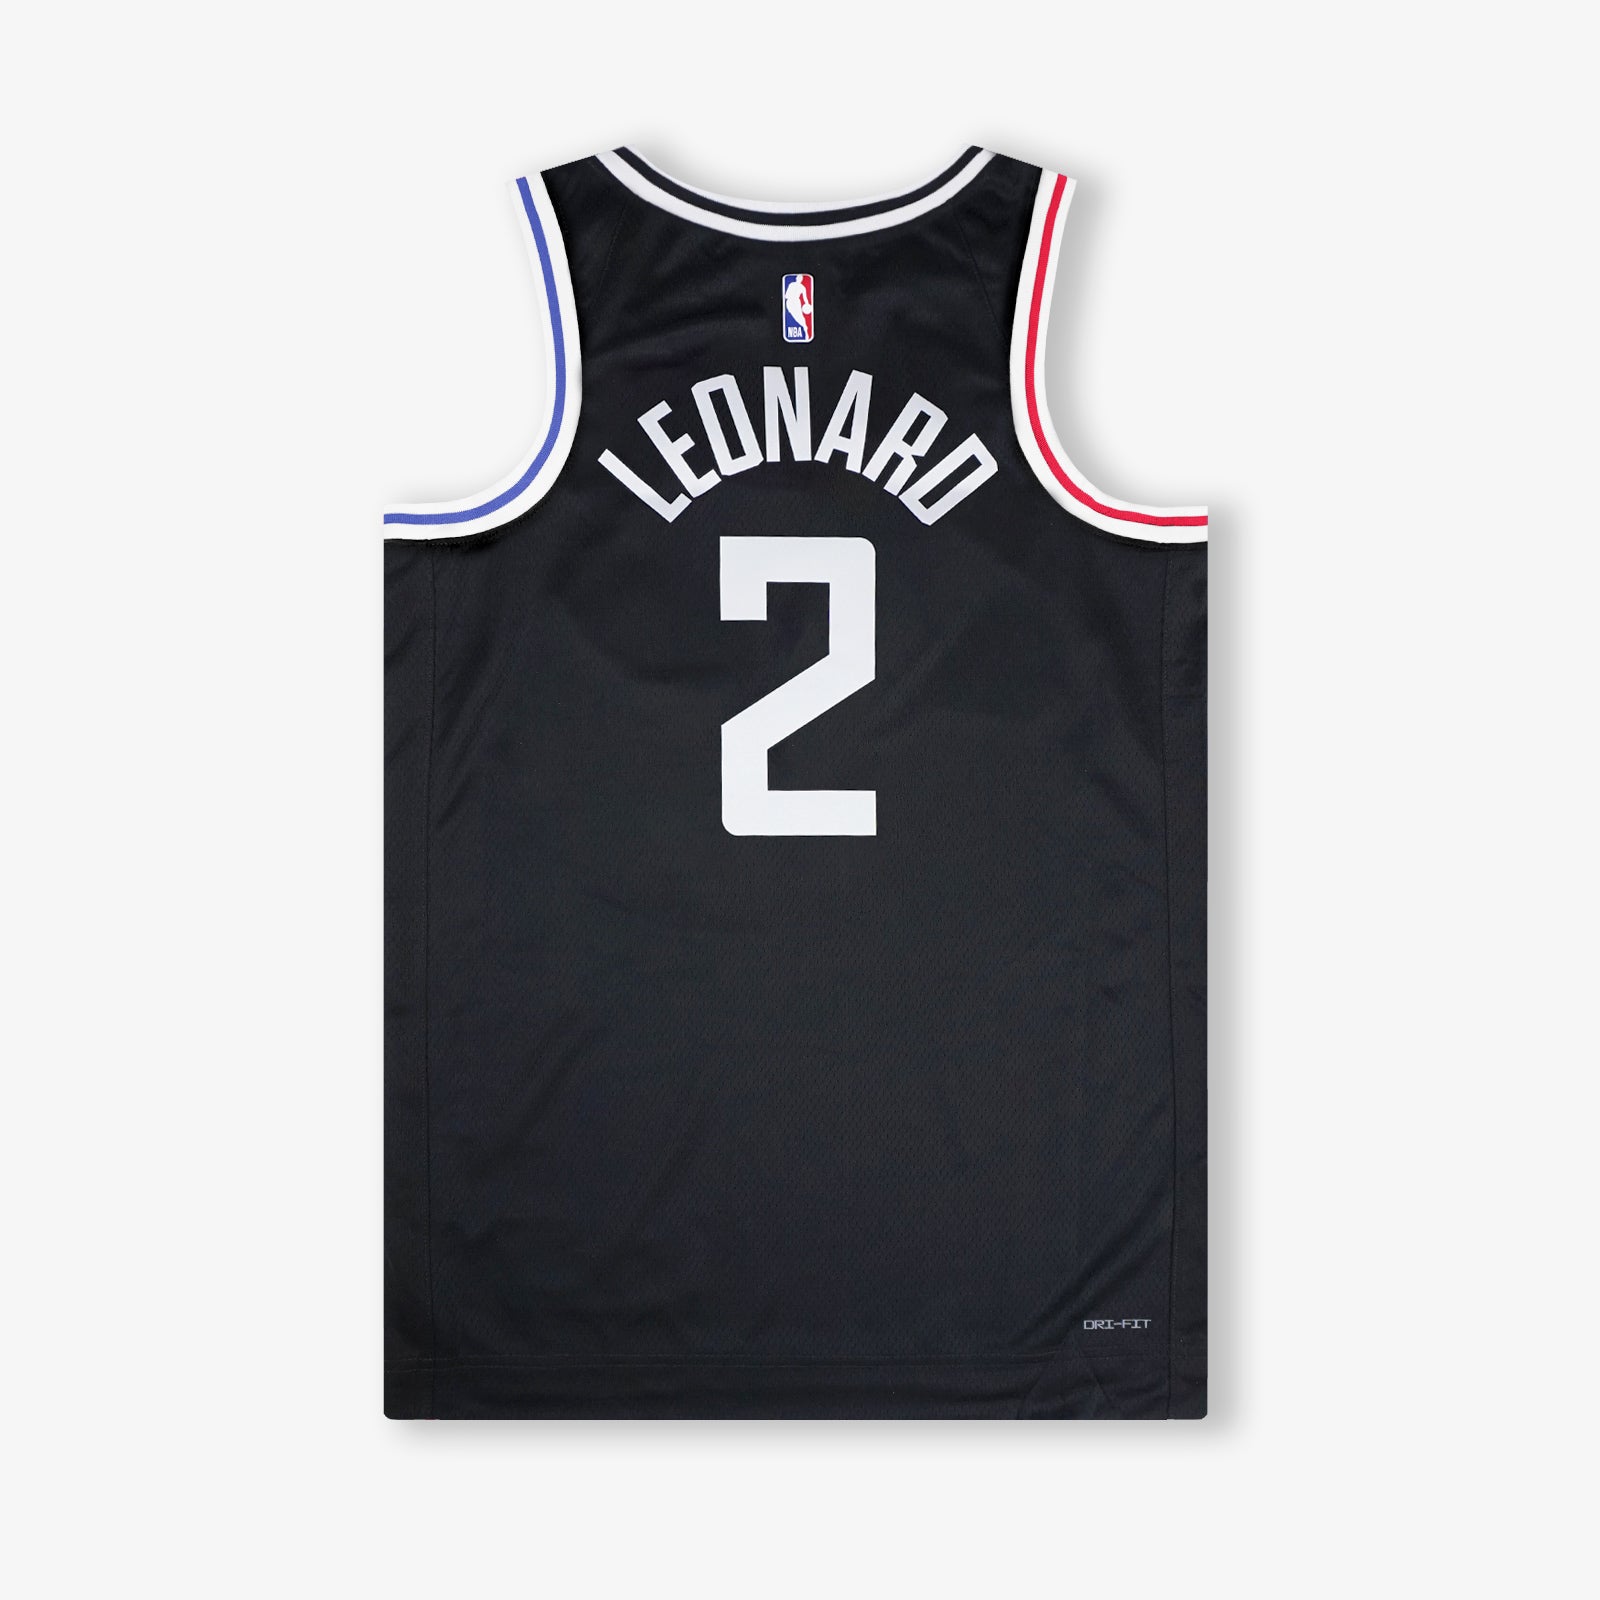 L.A. Clippers debut new special edition jersey designed by Mister